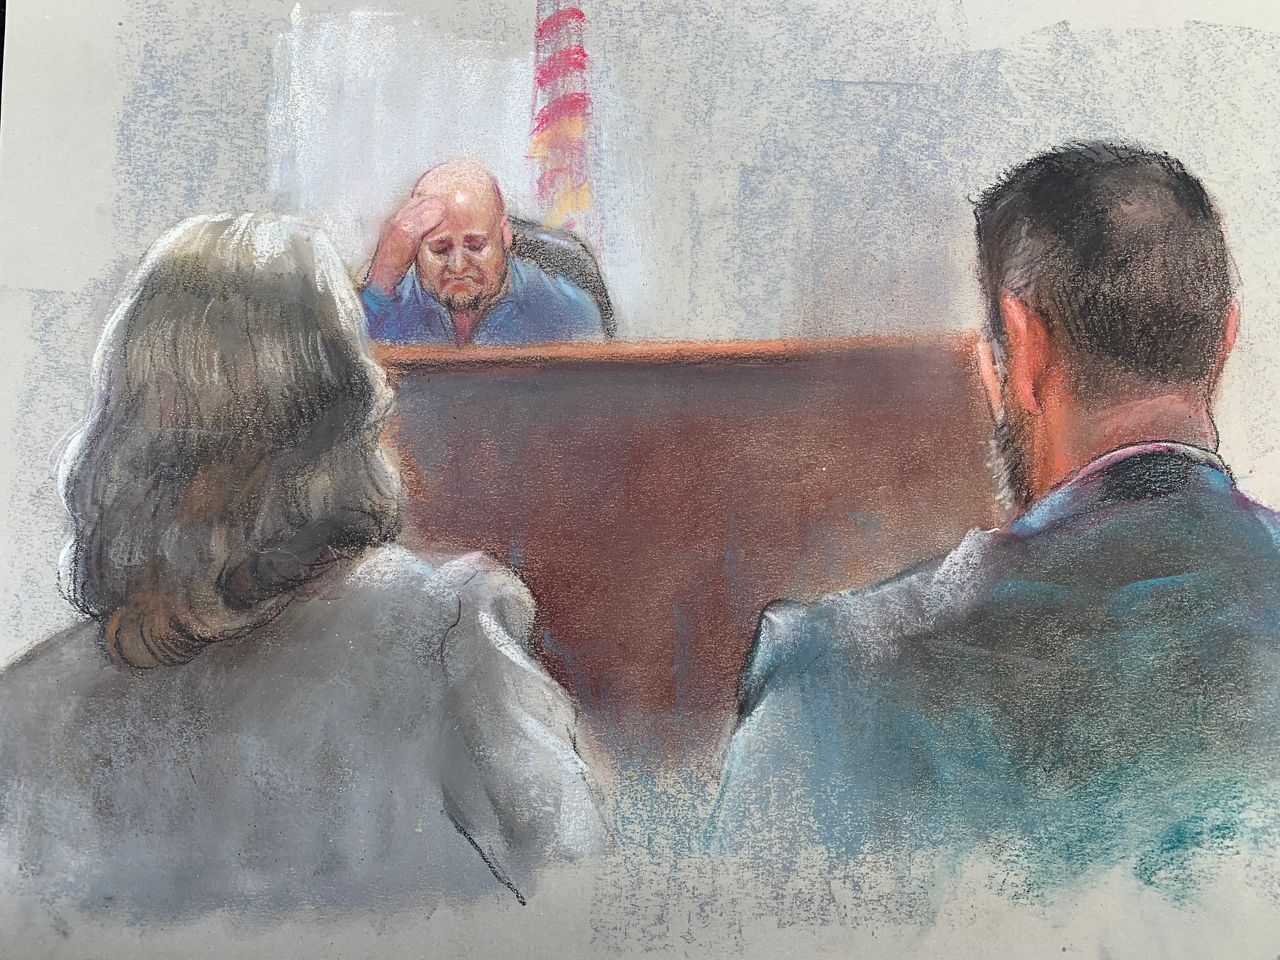 Fennell on the stand during the fourth day of testimony at the Rodney Reed hearing. (Credit: Jorge Molina)